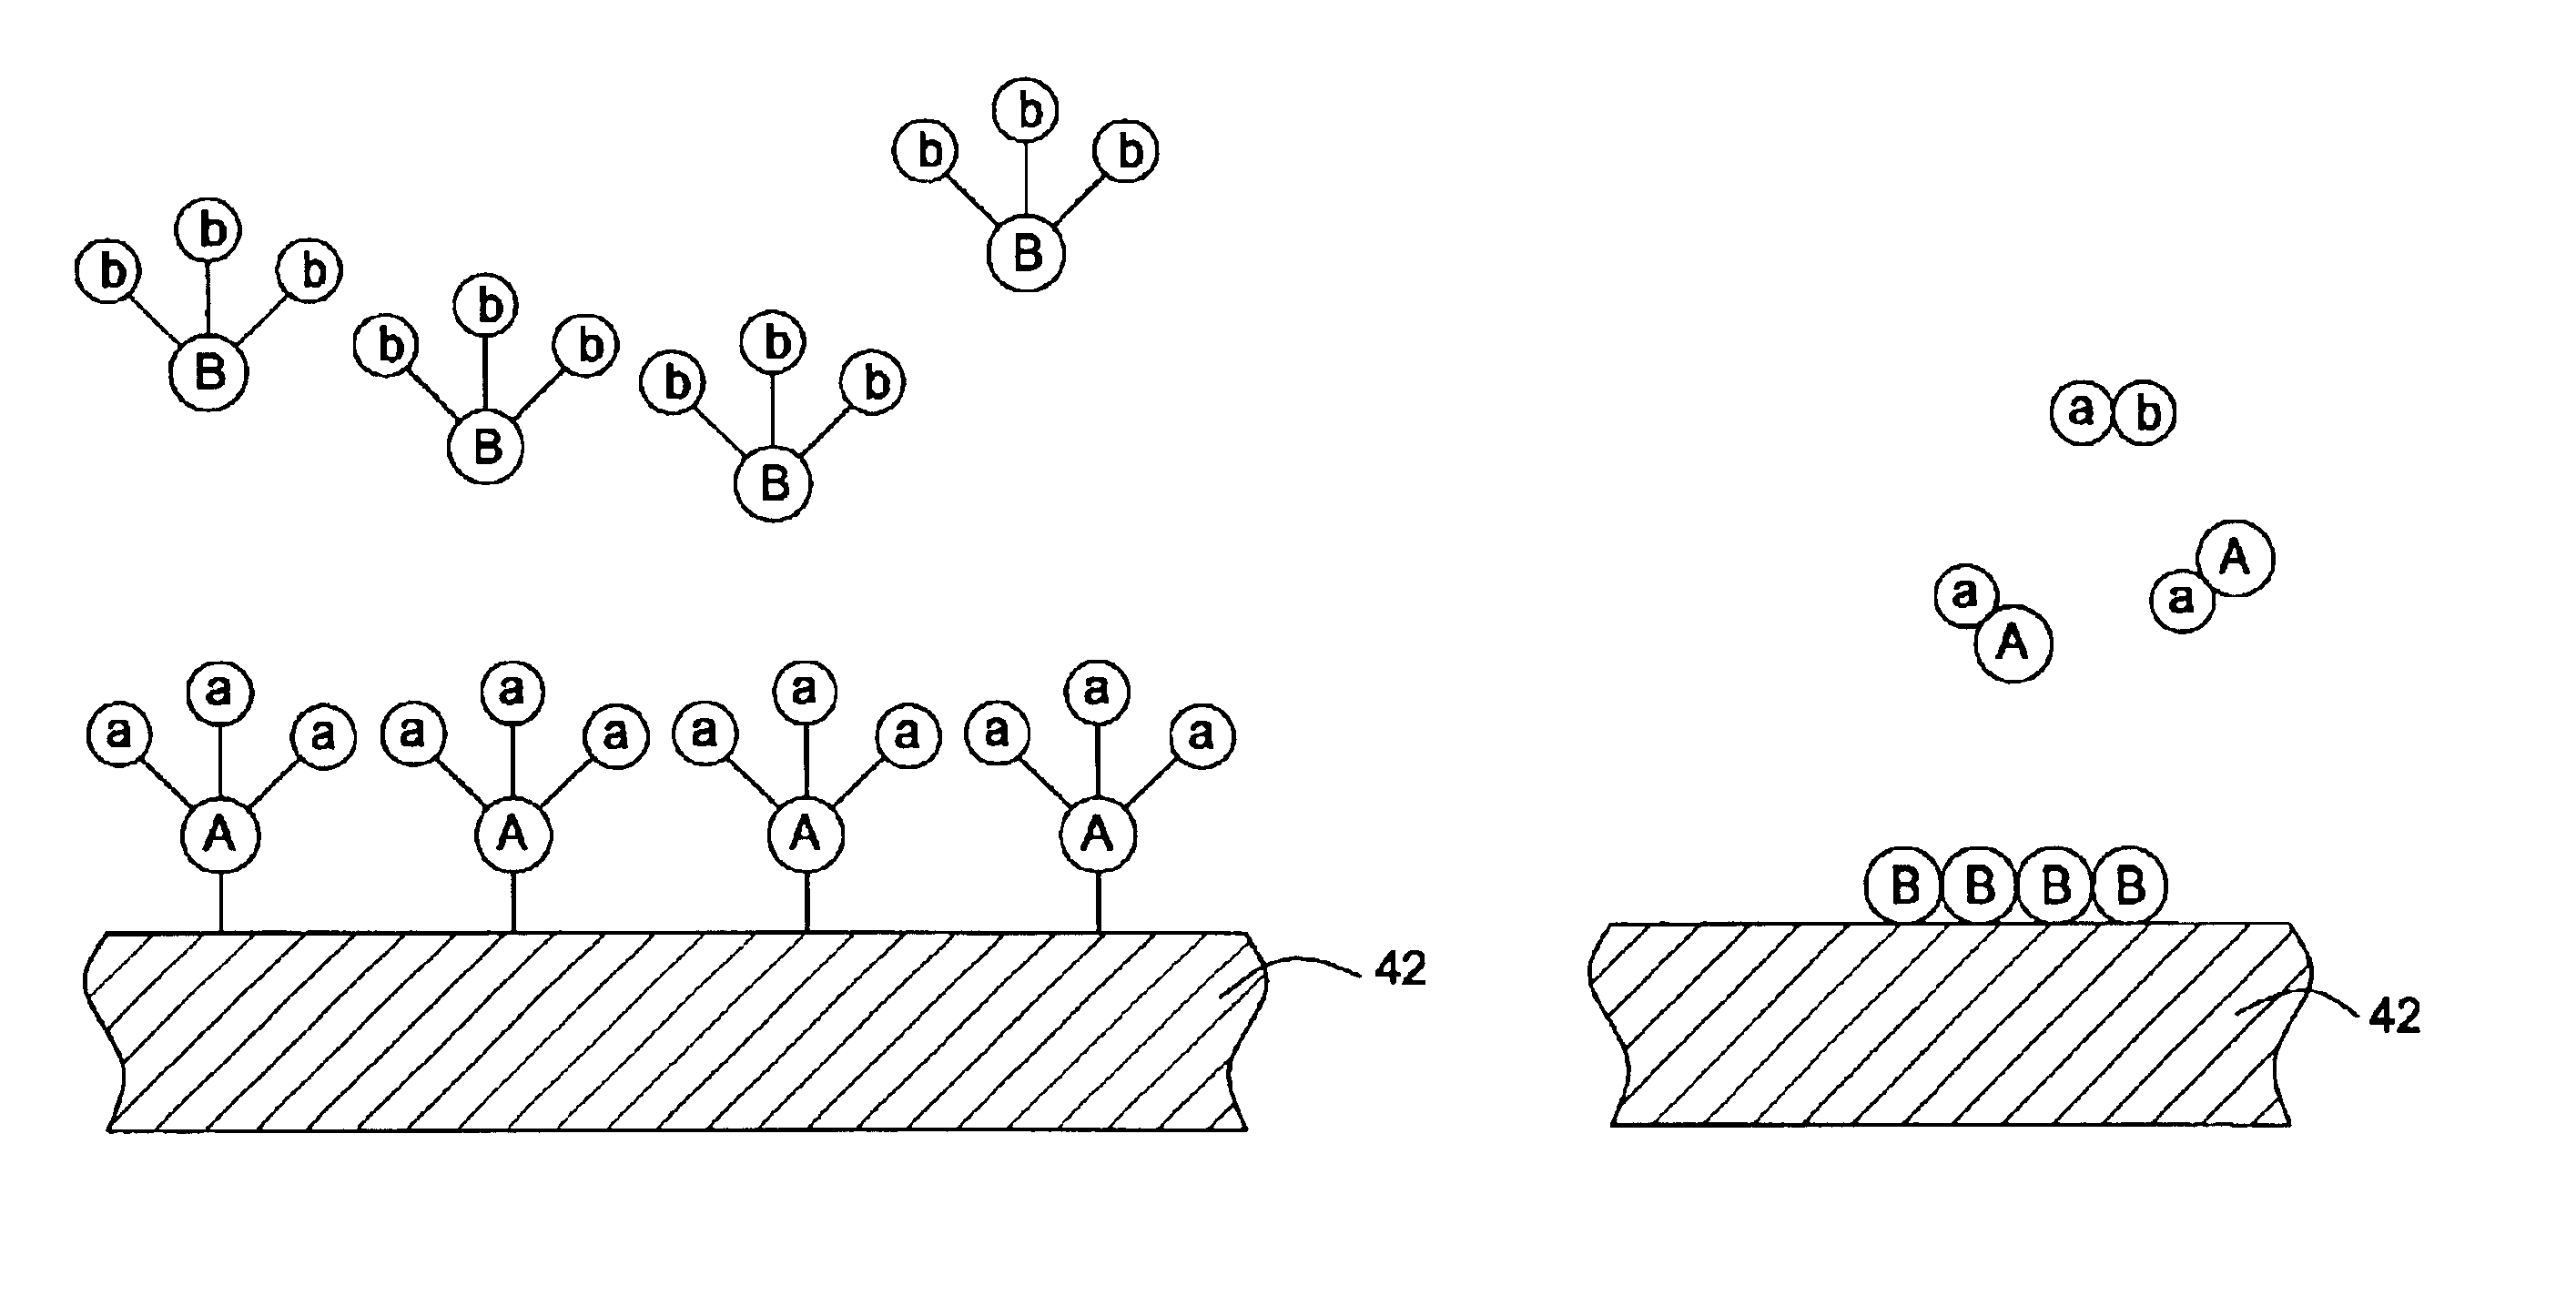 Method and apparatus for depositing tungsten after surface treatment to improve film characteristics